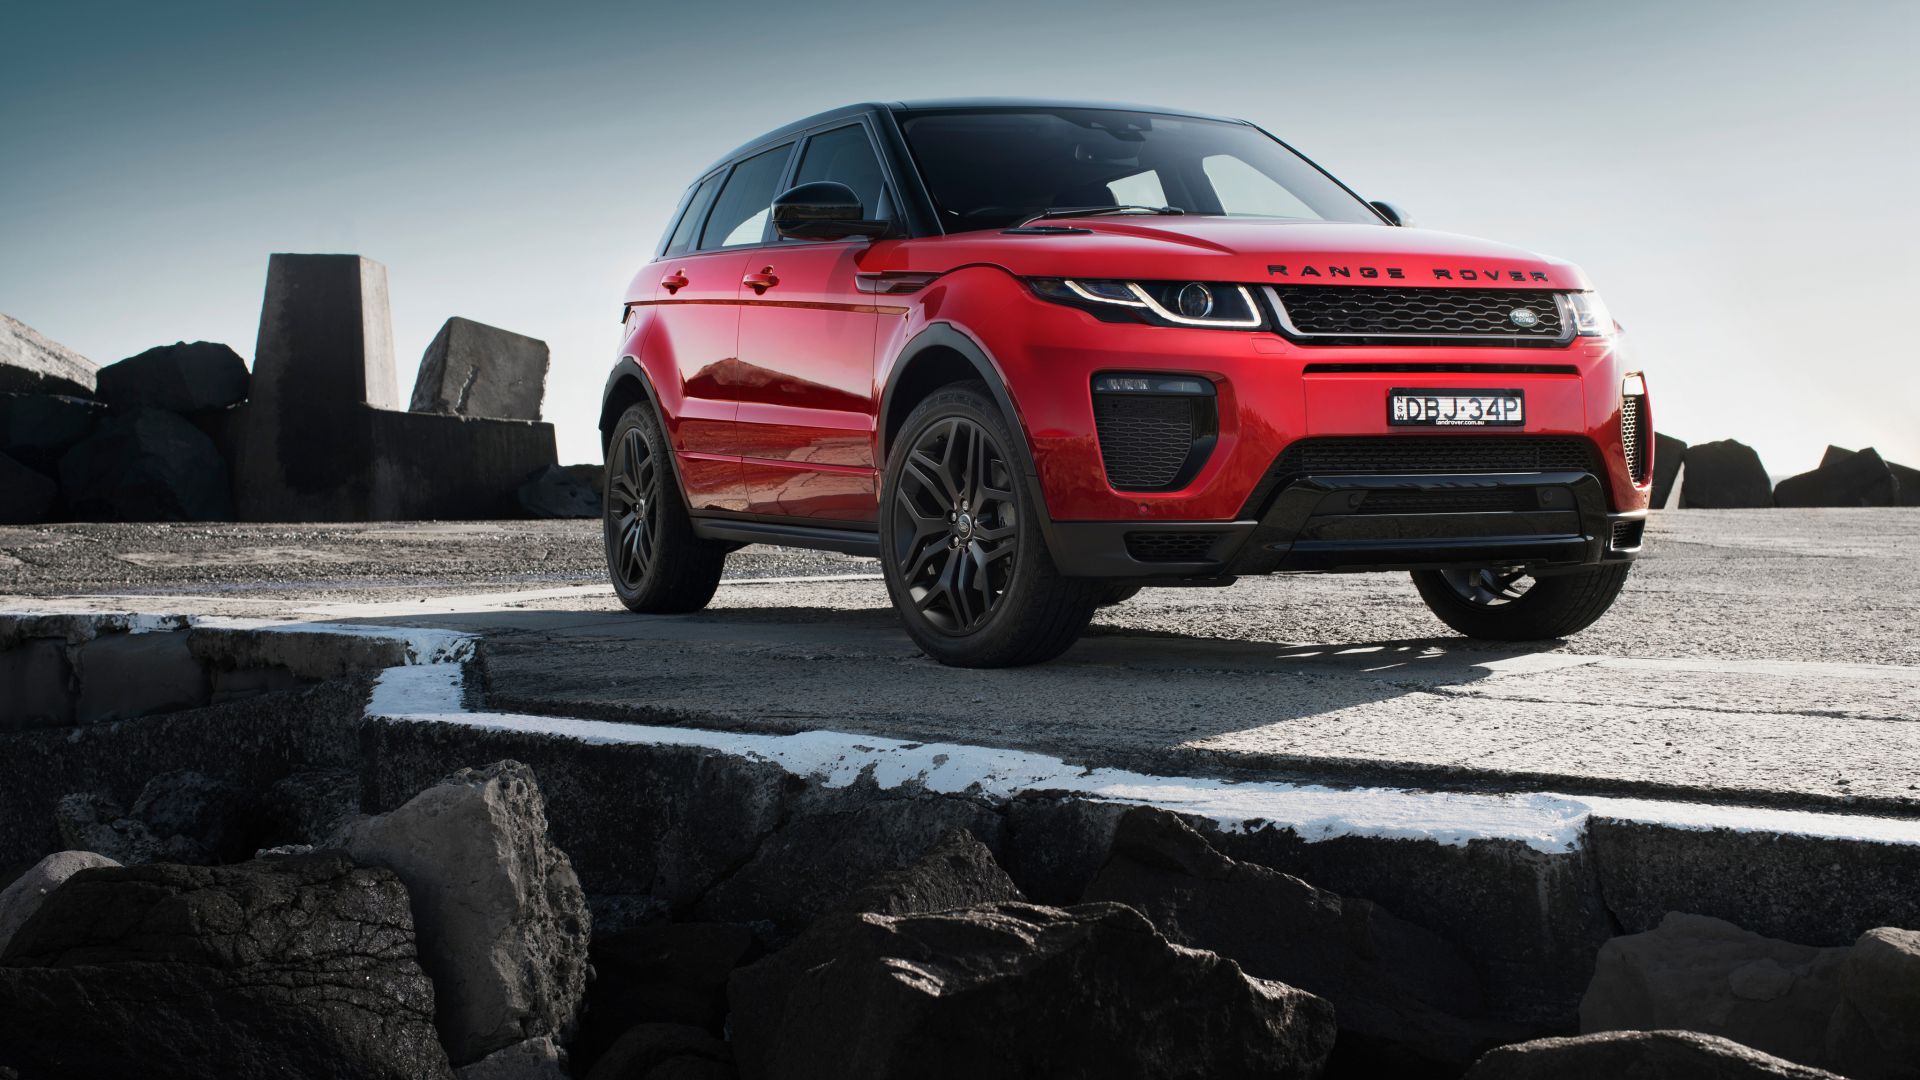 Desktop Wallpaper Range Rover Evoque, Suv, Red Car, Front View, Hd Image,  Picture, Background, Wfg4fs